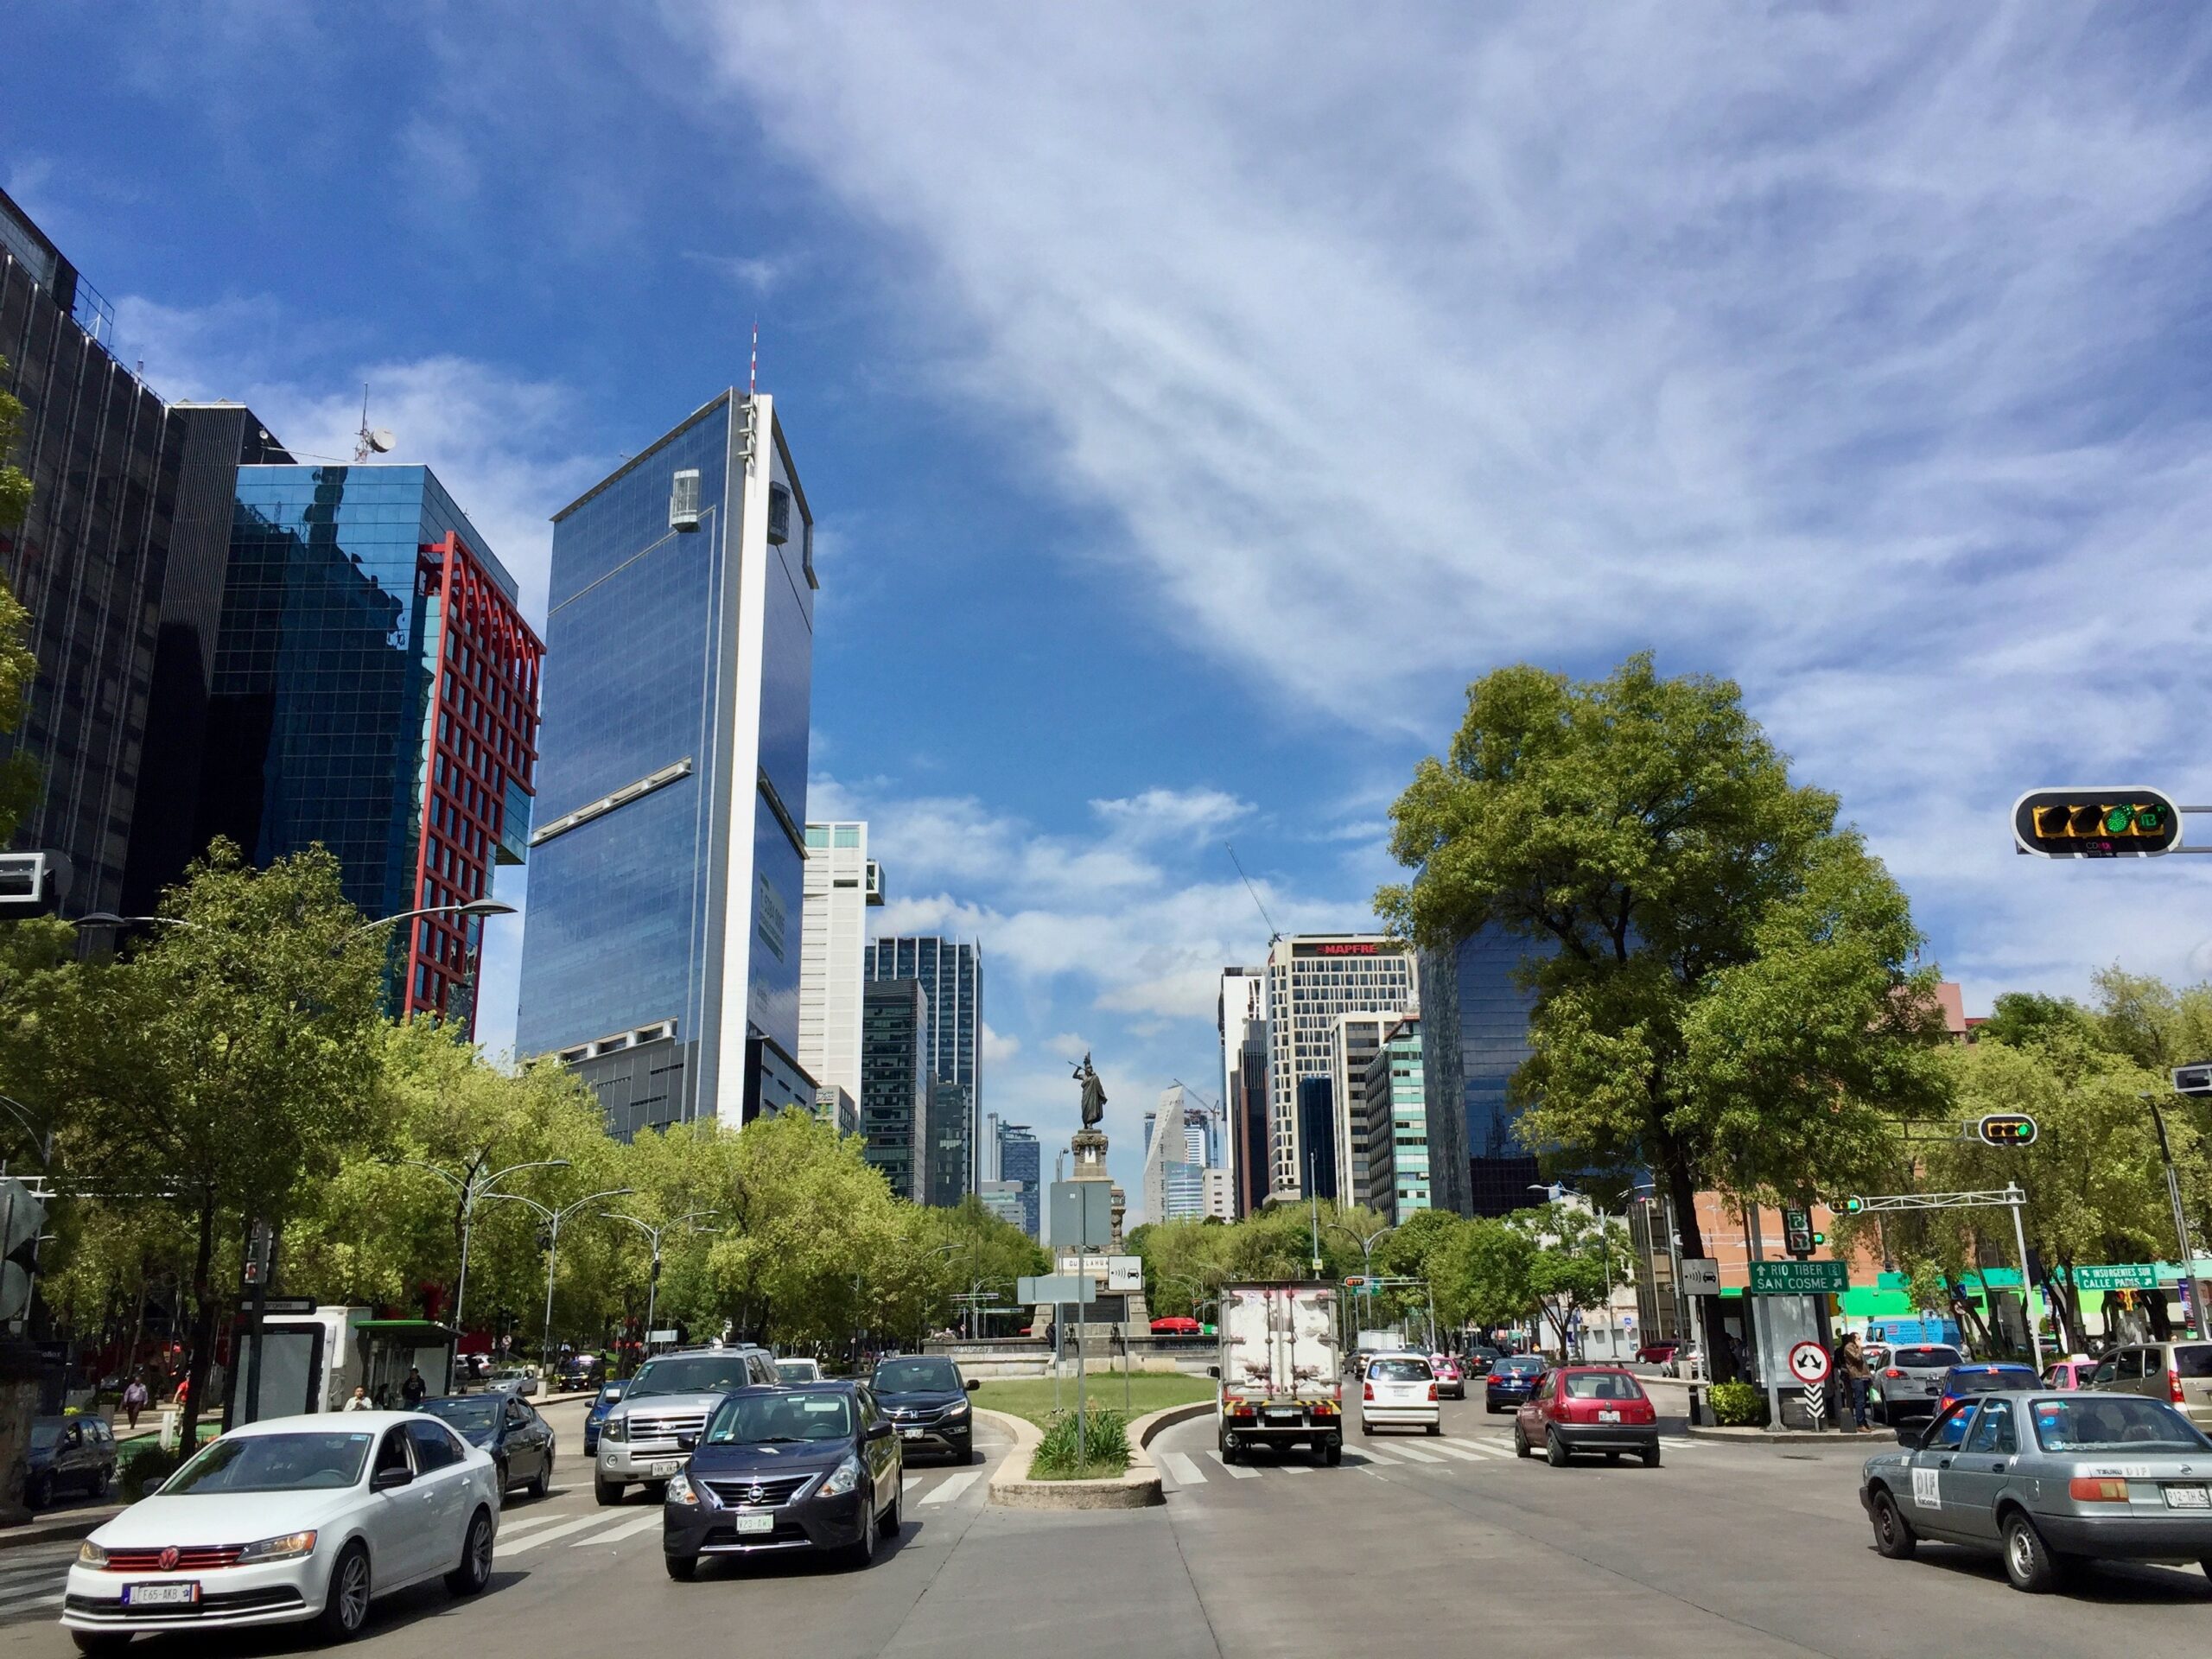 These techniques and tips will help travelers stay safe in Mexico City.
pictured: Mexico City on a bright clear day with cars passing by on the city street 